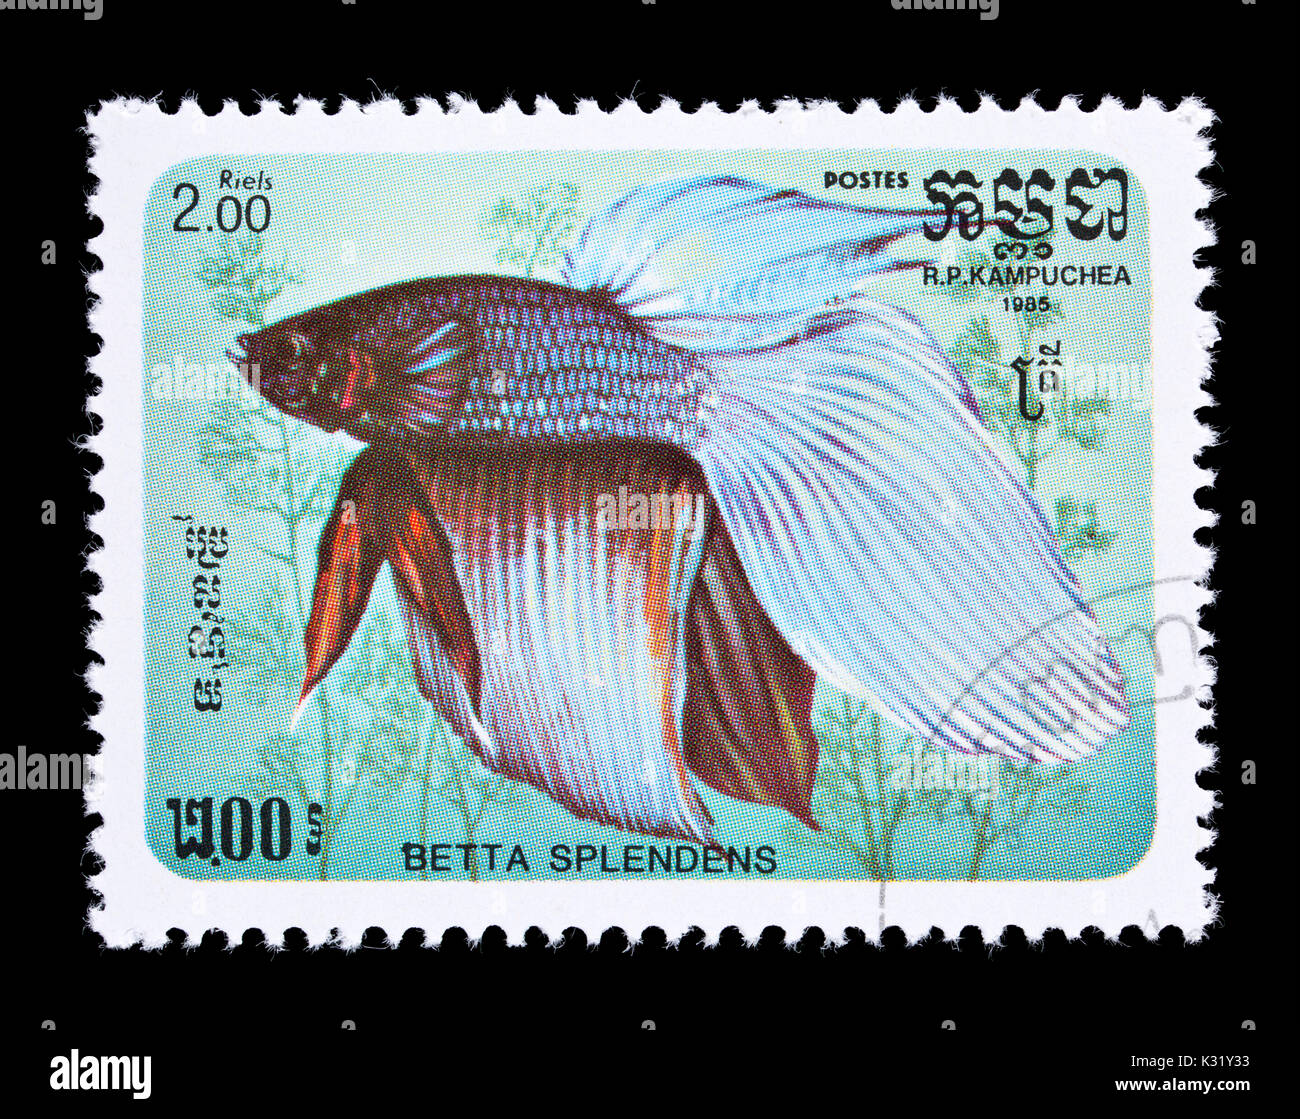 Postage stamp from Cambodia (Kampuchea) depicting a Siamese fighting fish (Betta splendens) Stock Photo